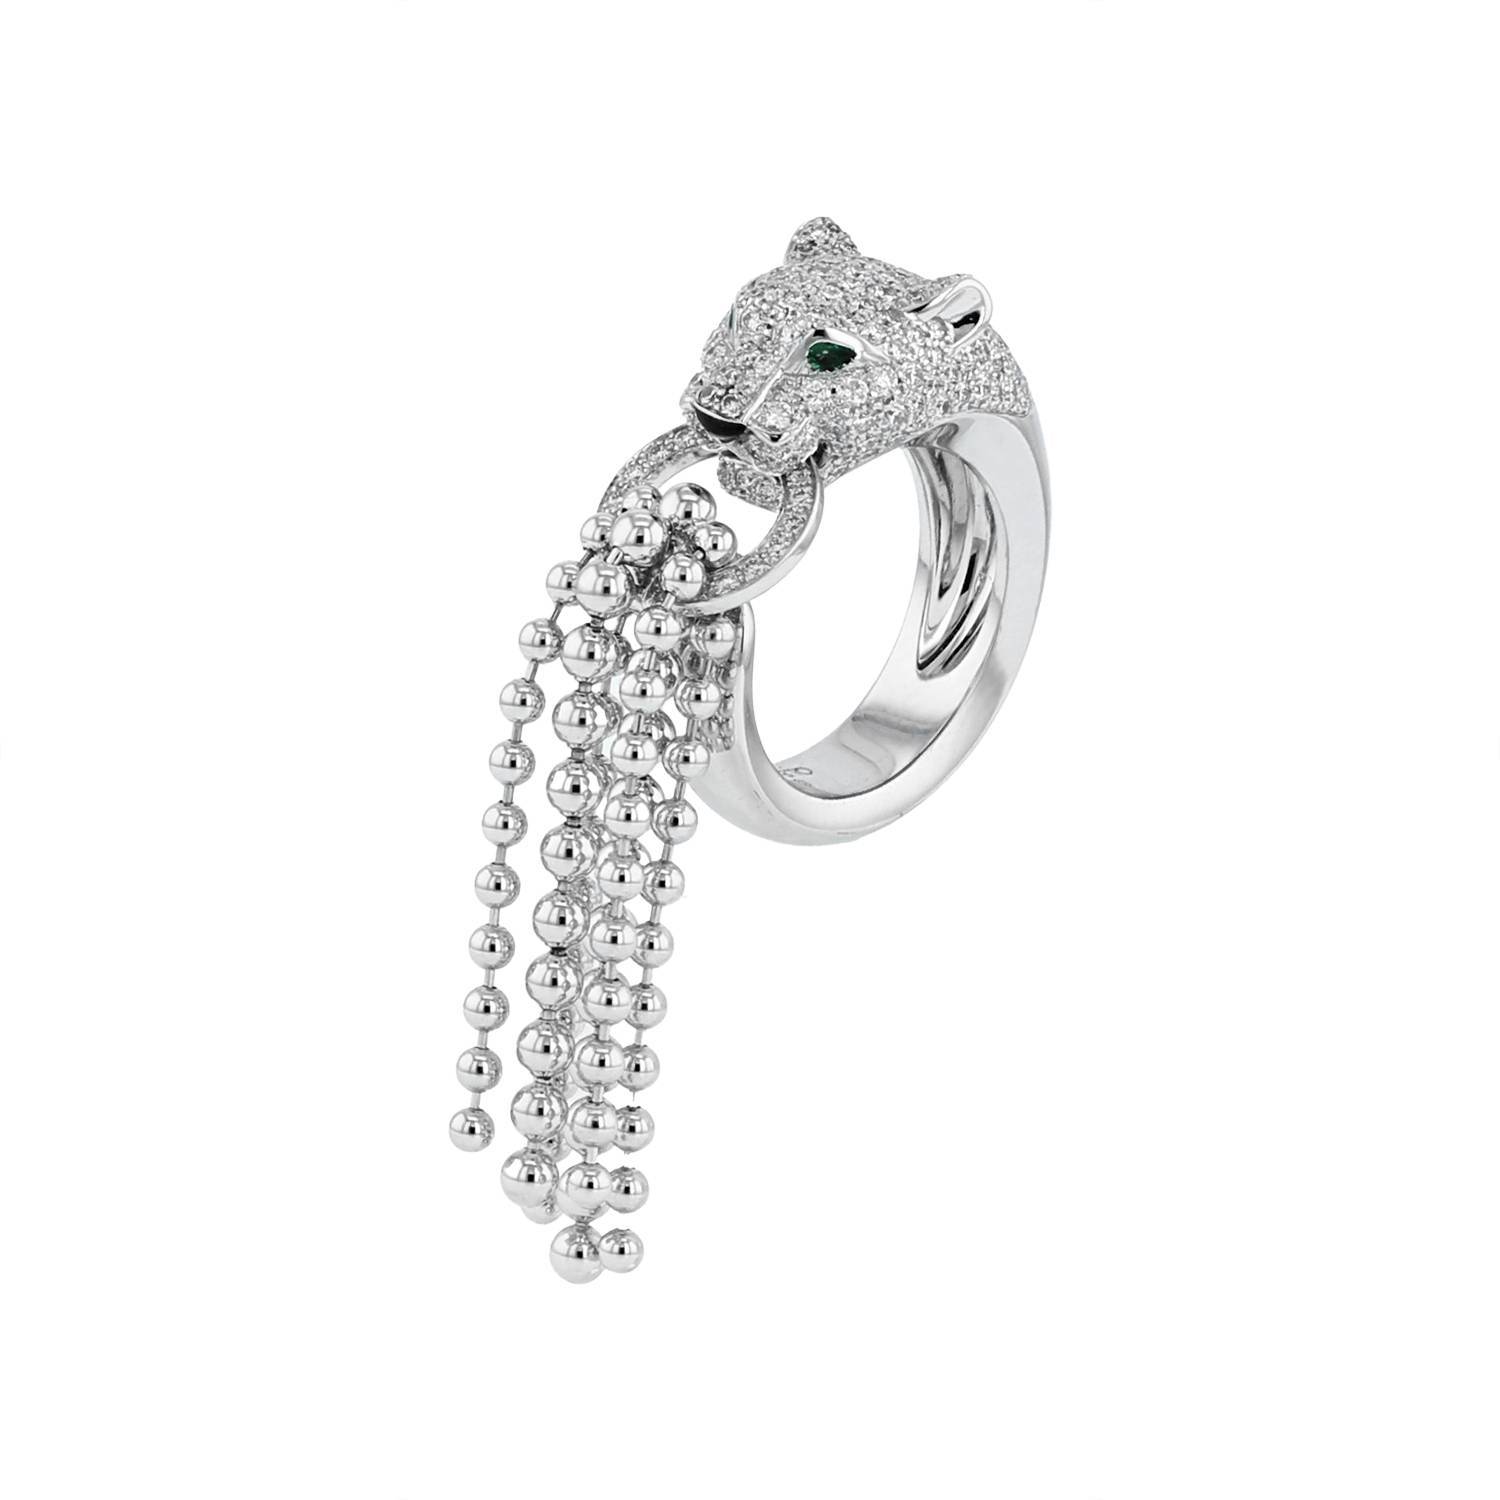 Cartier Panthère ring in white gold, diamonds and emerald - 00pp